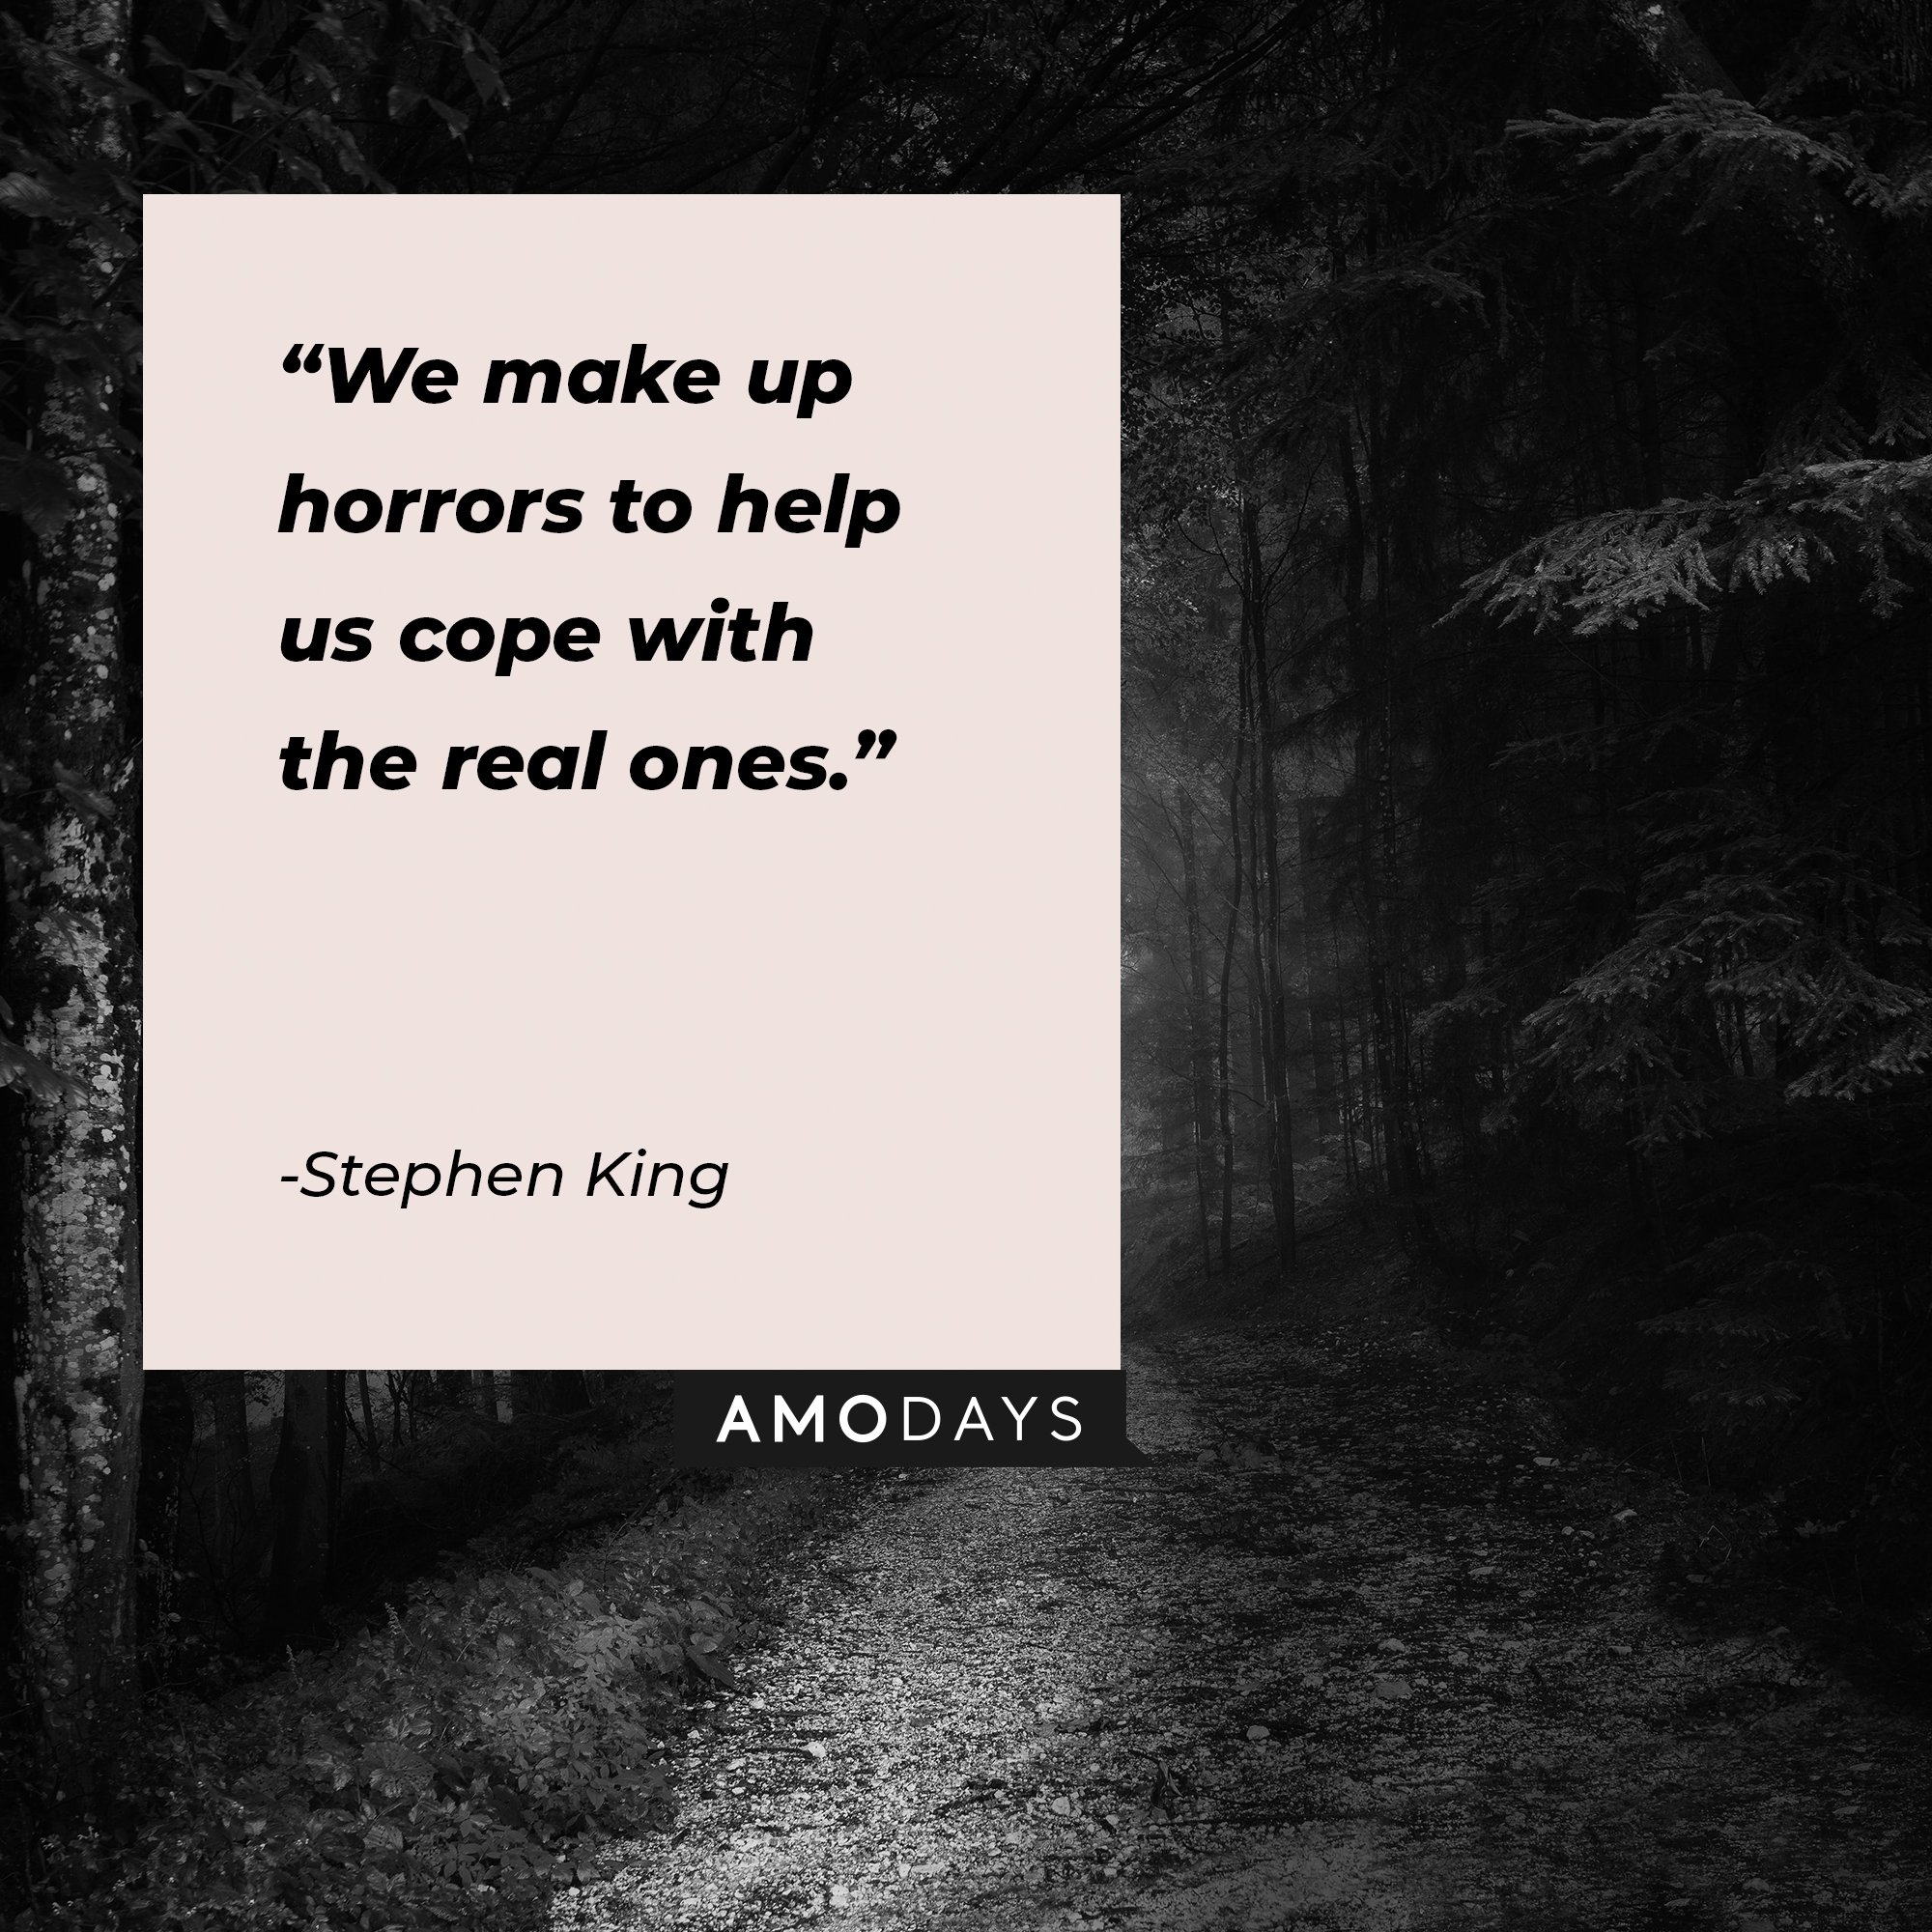 Stephen King’s quote: "We make up horrors to help us cope with the real ones." | Image: AmoDays